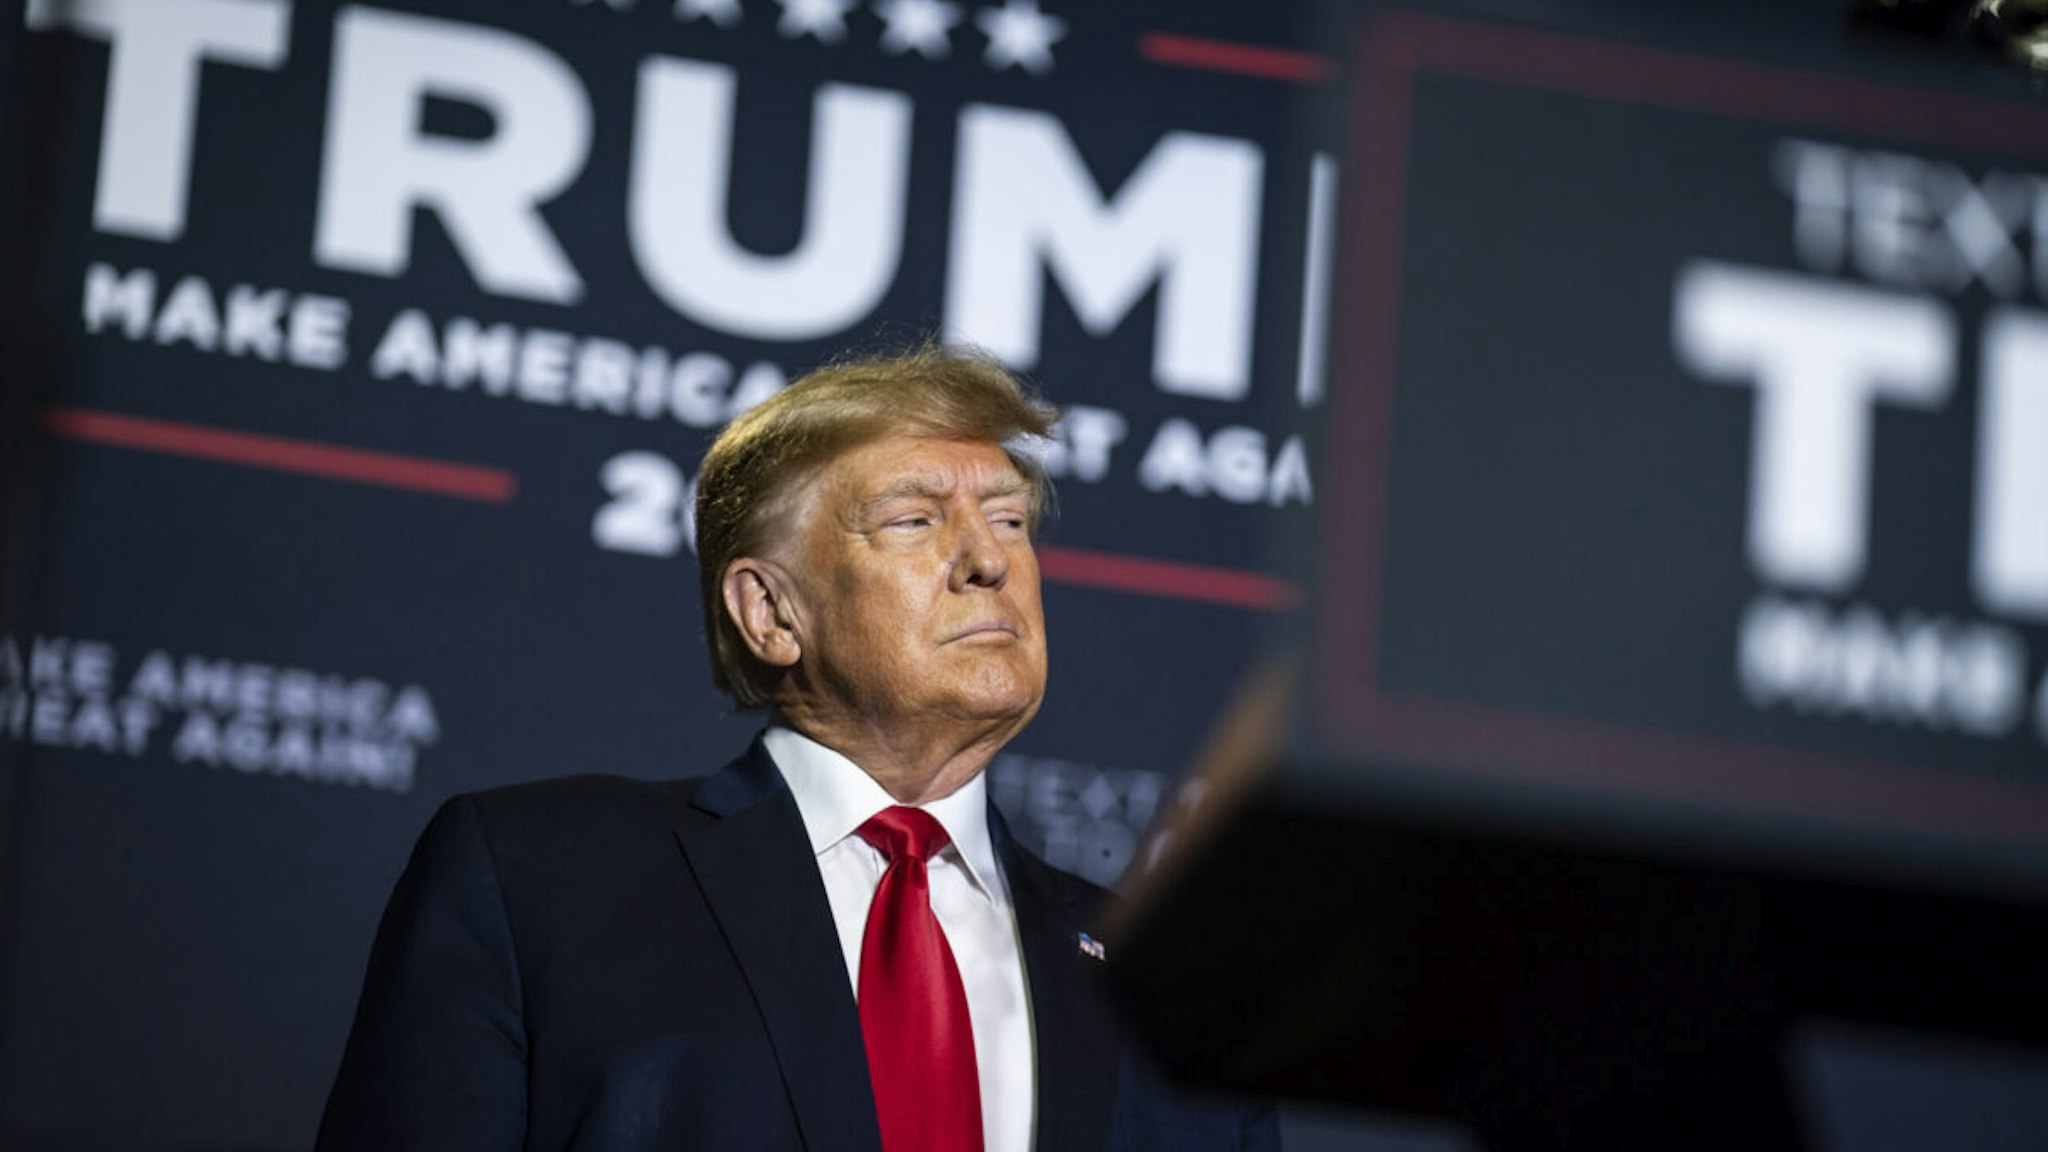 Former President Donald Trump speaks at a campaign event at the DoubleTree Manchester Downtown on Thursday, April 27, 2023, in Manchester, NH.